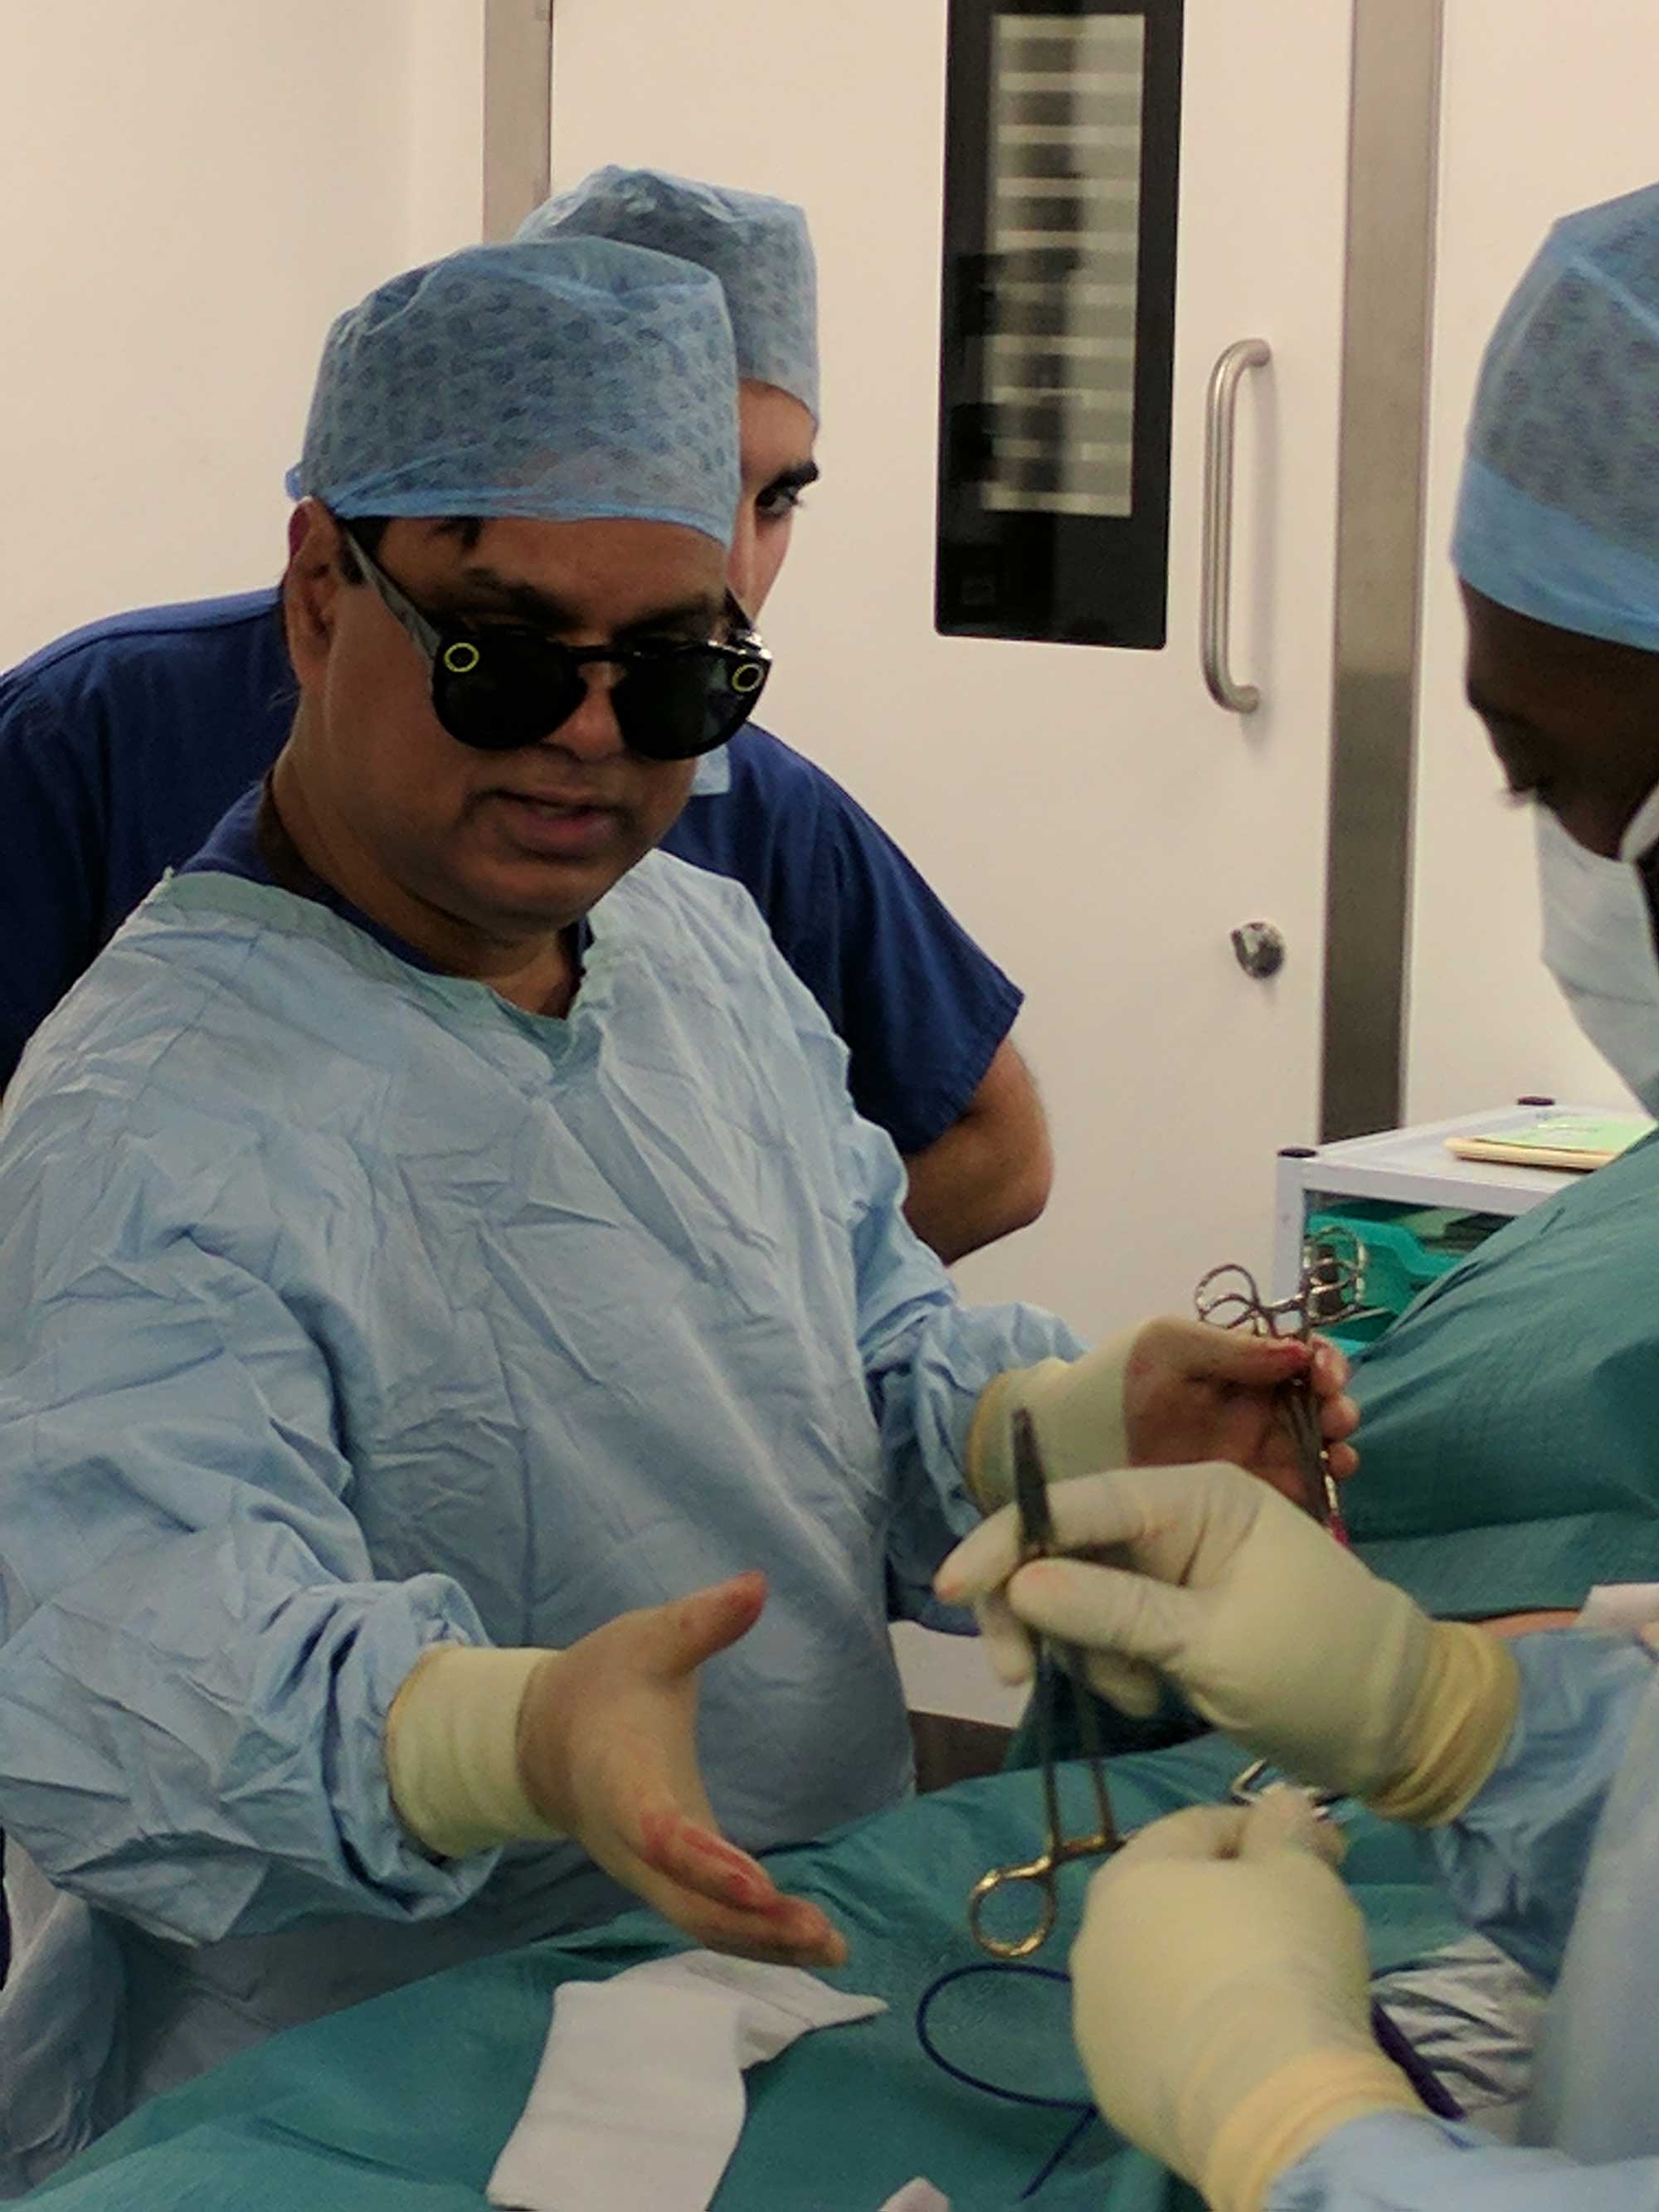 Dr. Shafi Ahmed perfoms surgery with the Snapchat Spectacles, Dec. 9, 2016. (Chris Rogers)